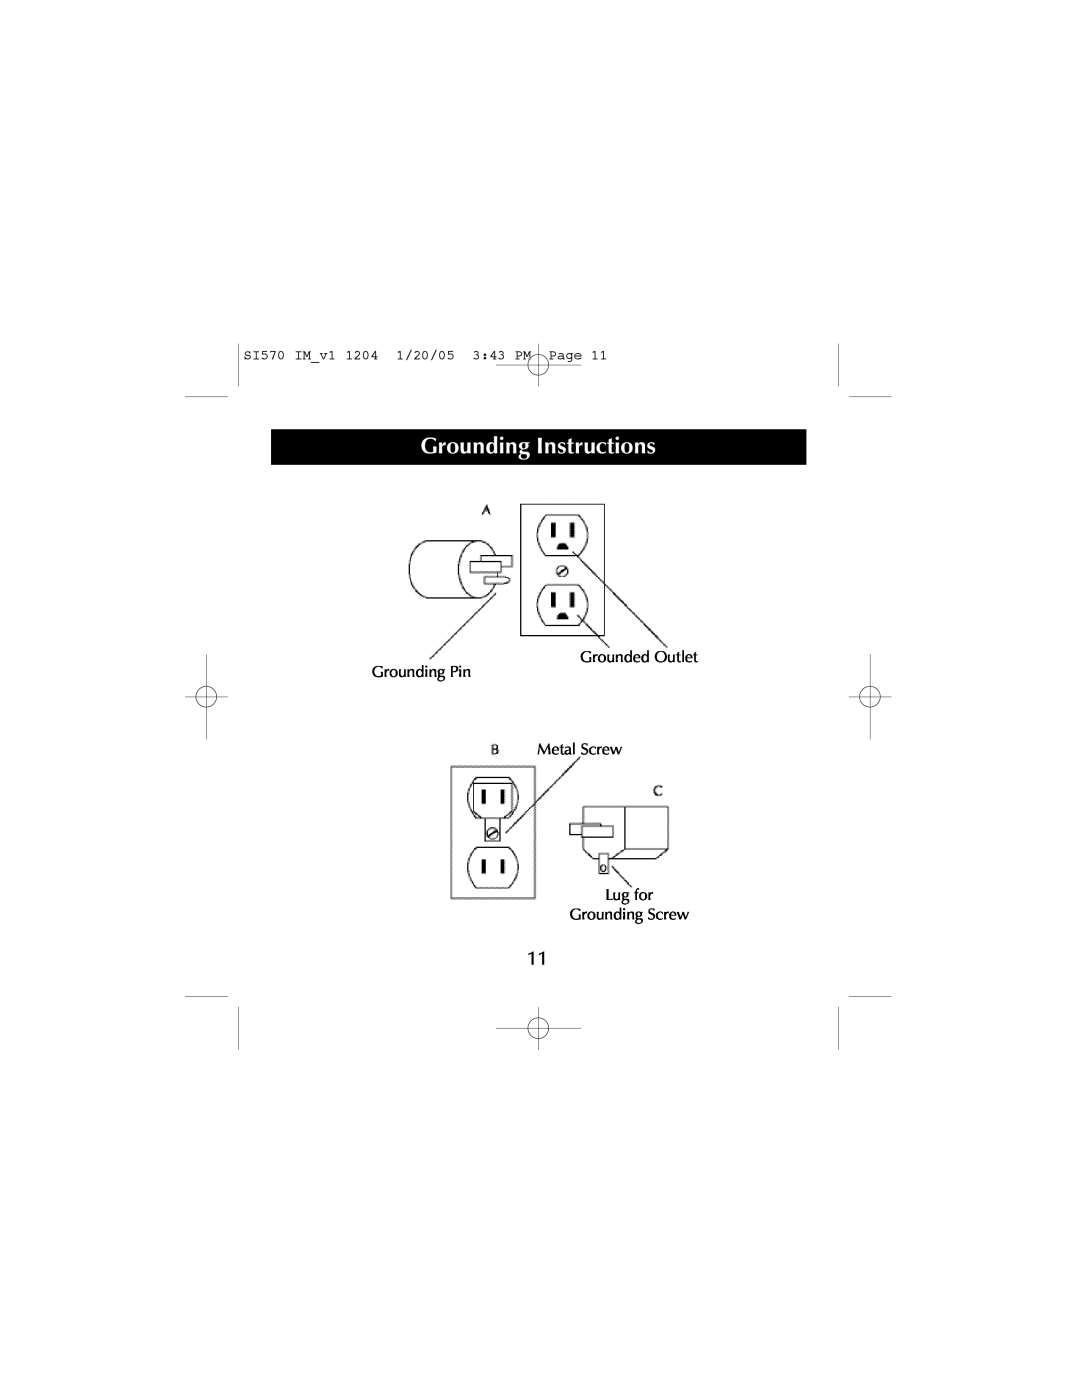 Sharper Image S1570 manual Grounding Instructions, Grounded Outlet Grounding Pin Metal Screw Lug for, Grounding Screw, Page 